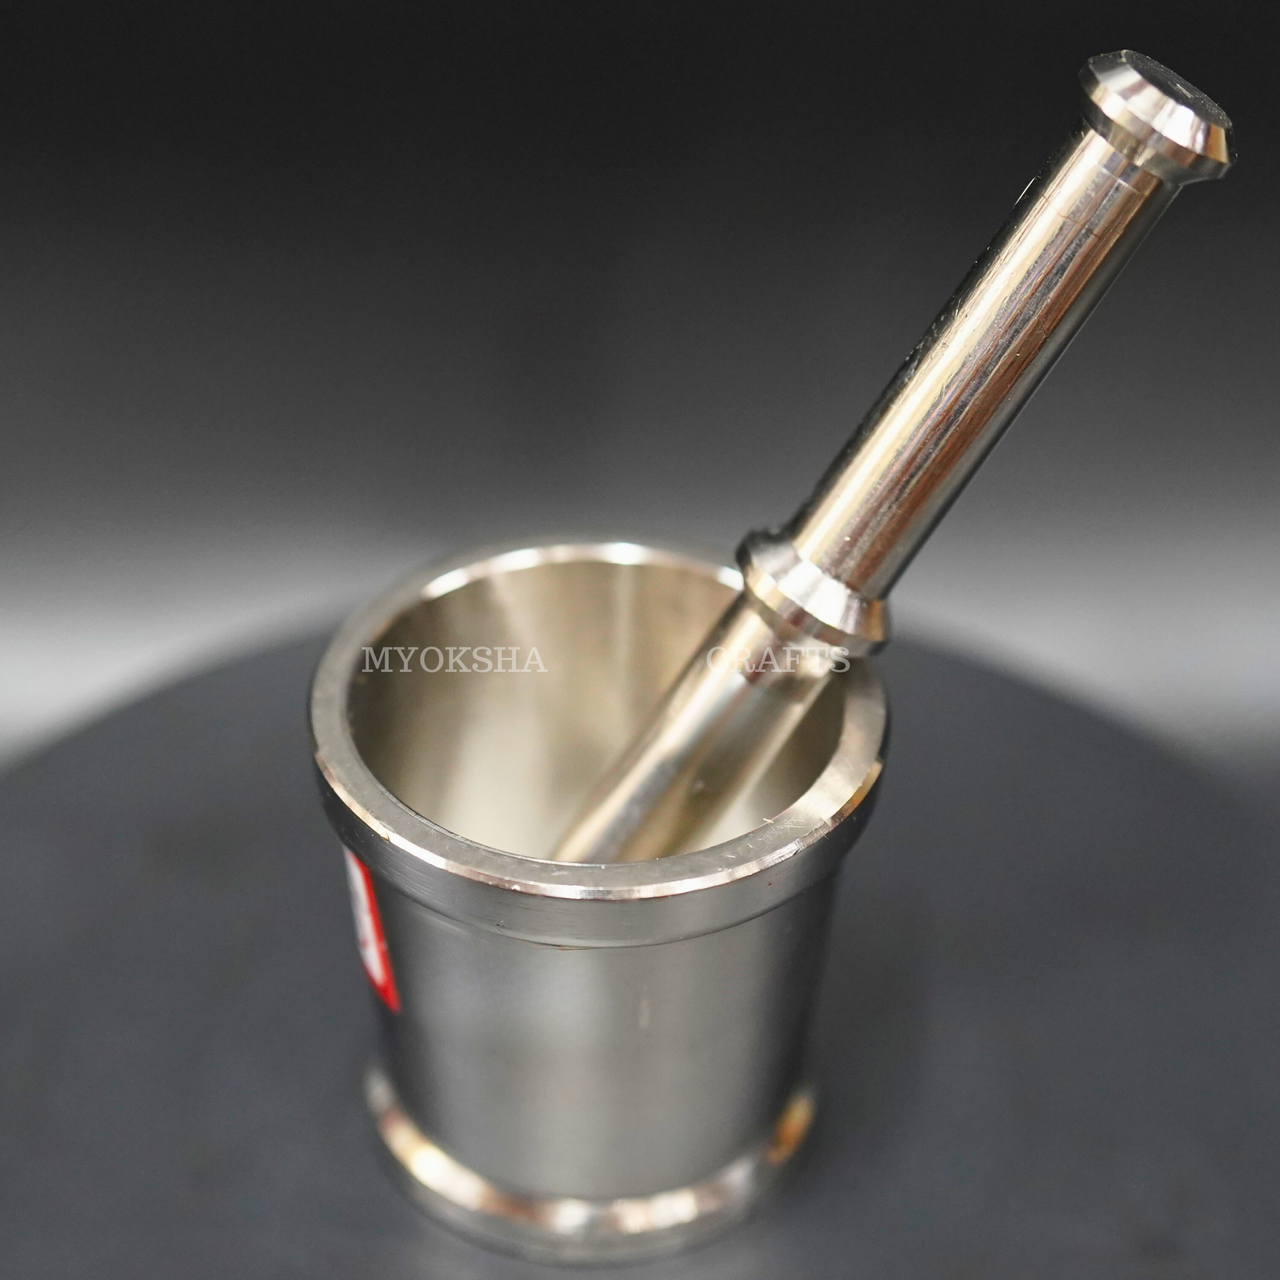 Stainless Steel Mortar & Pestle Set: Perfect for NRI Kitchen Delights - 1